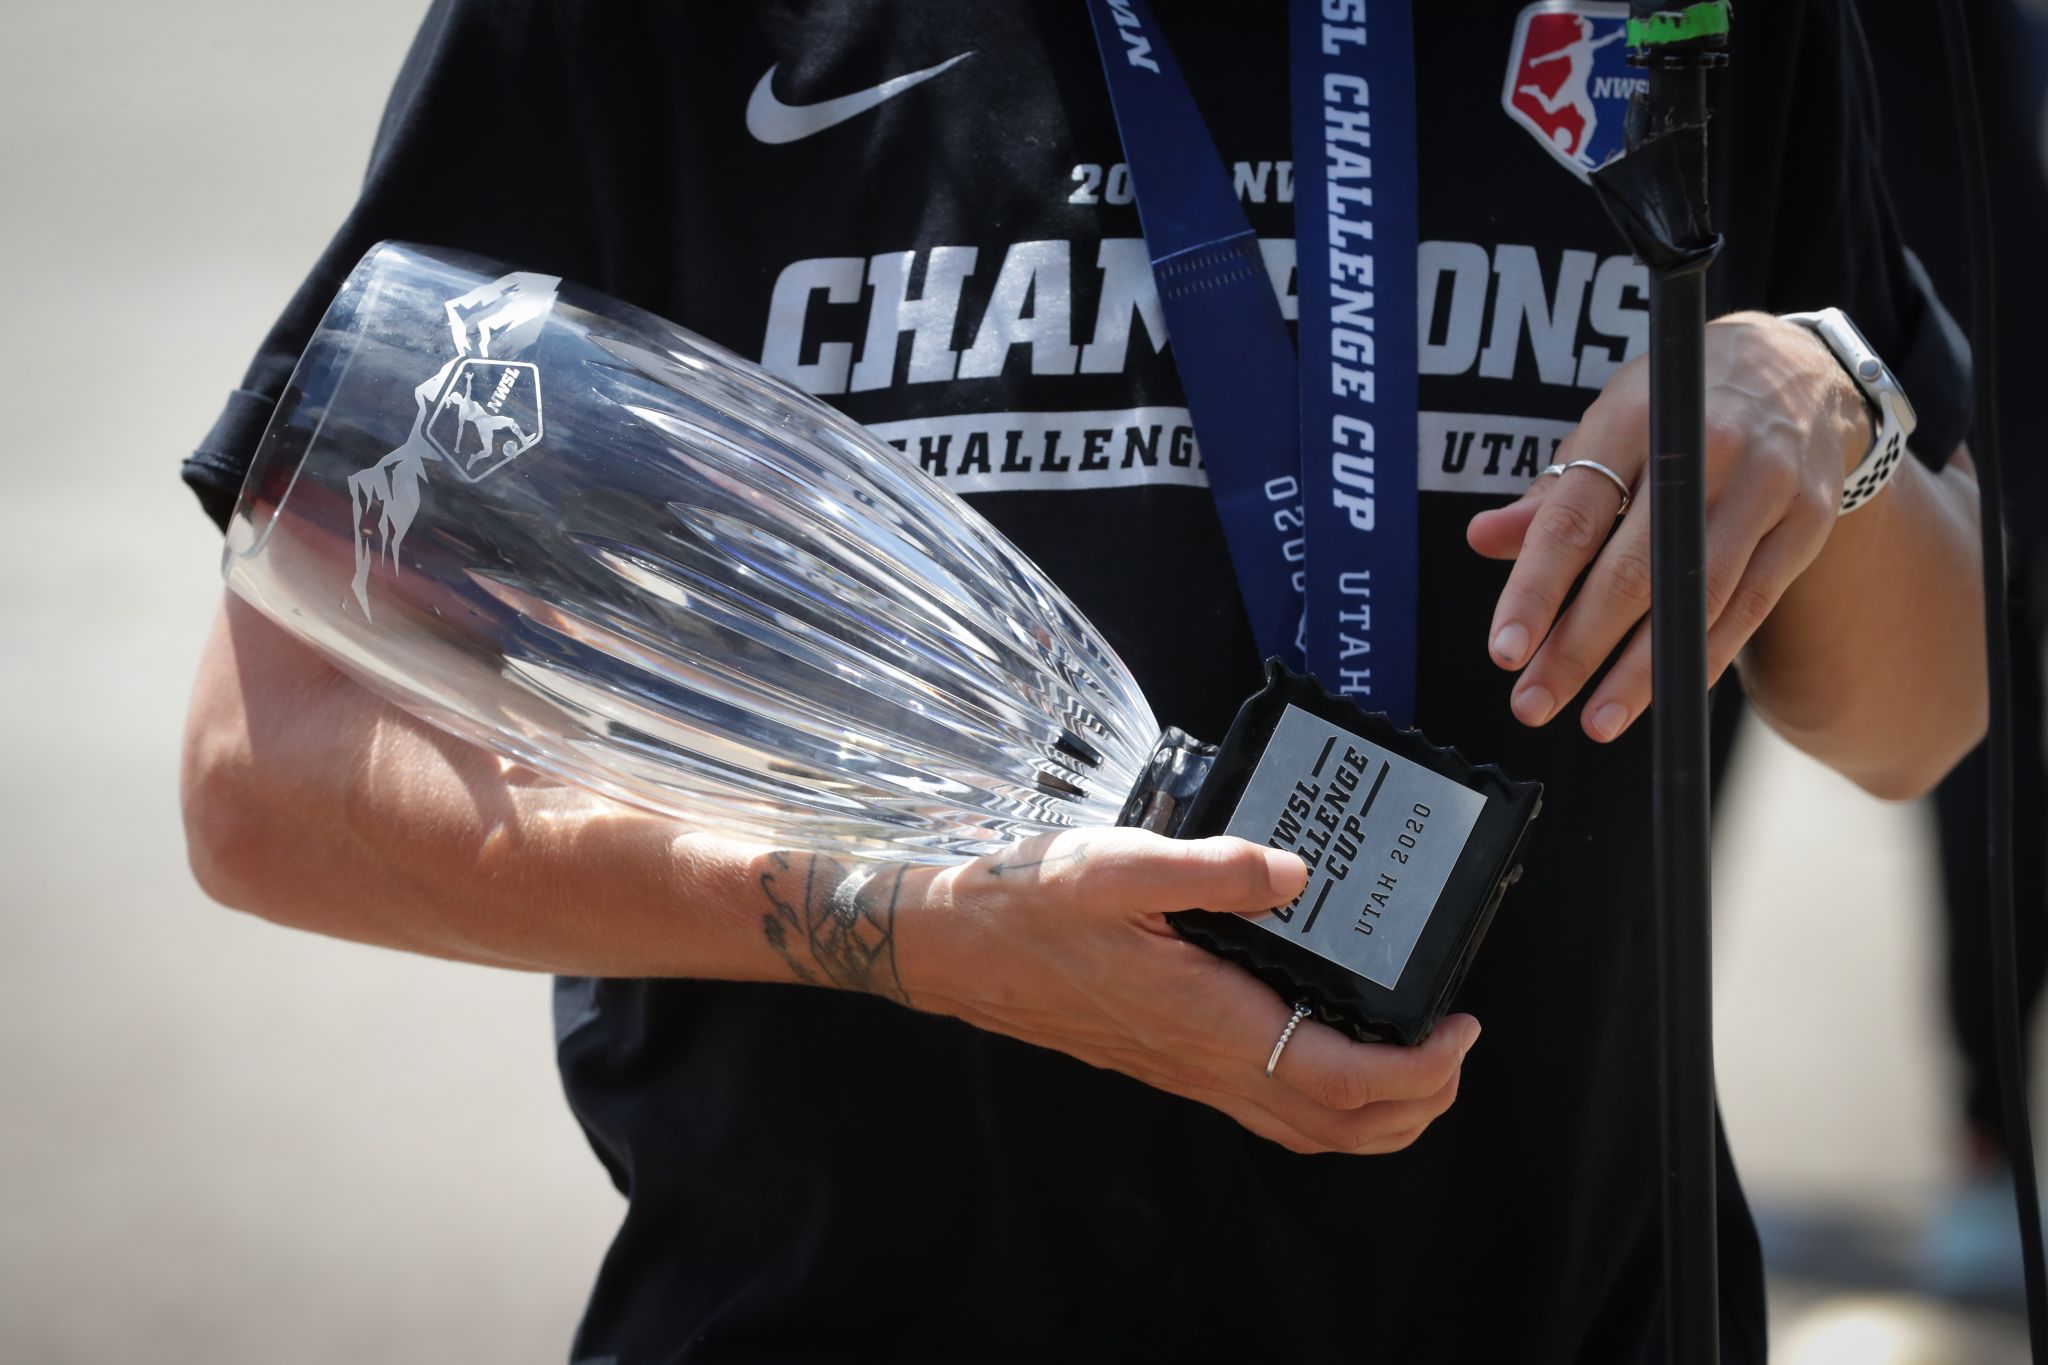 Dash return home after NWSL Cup championship